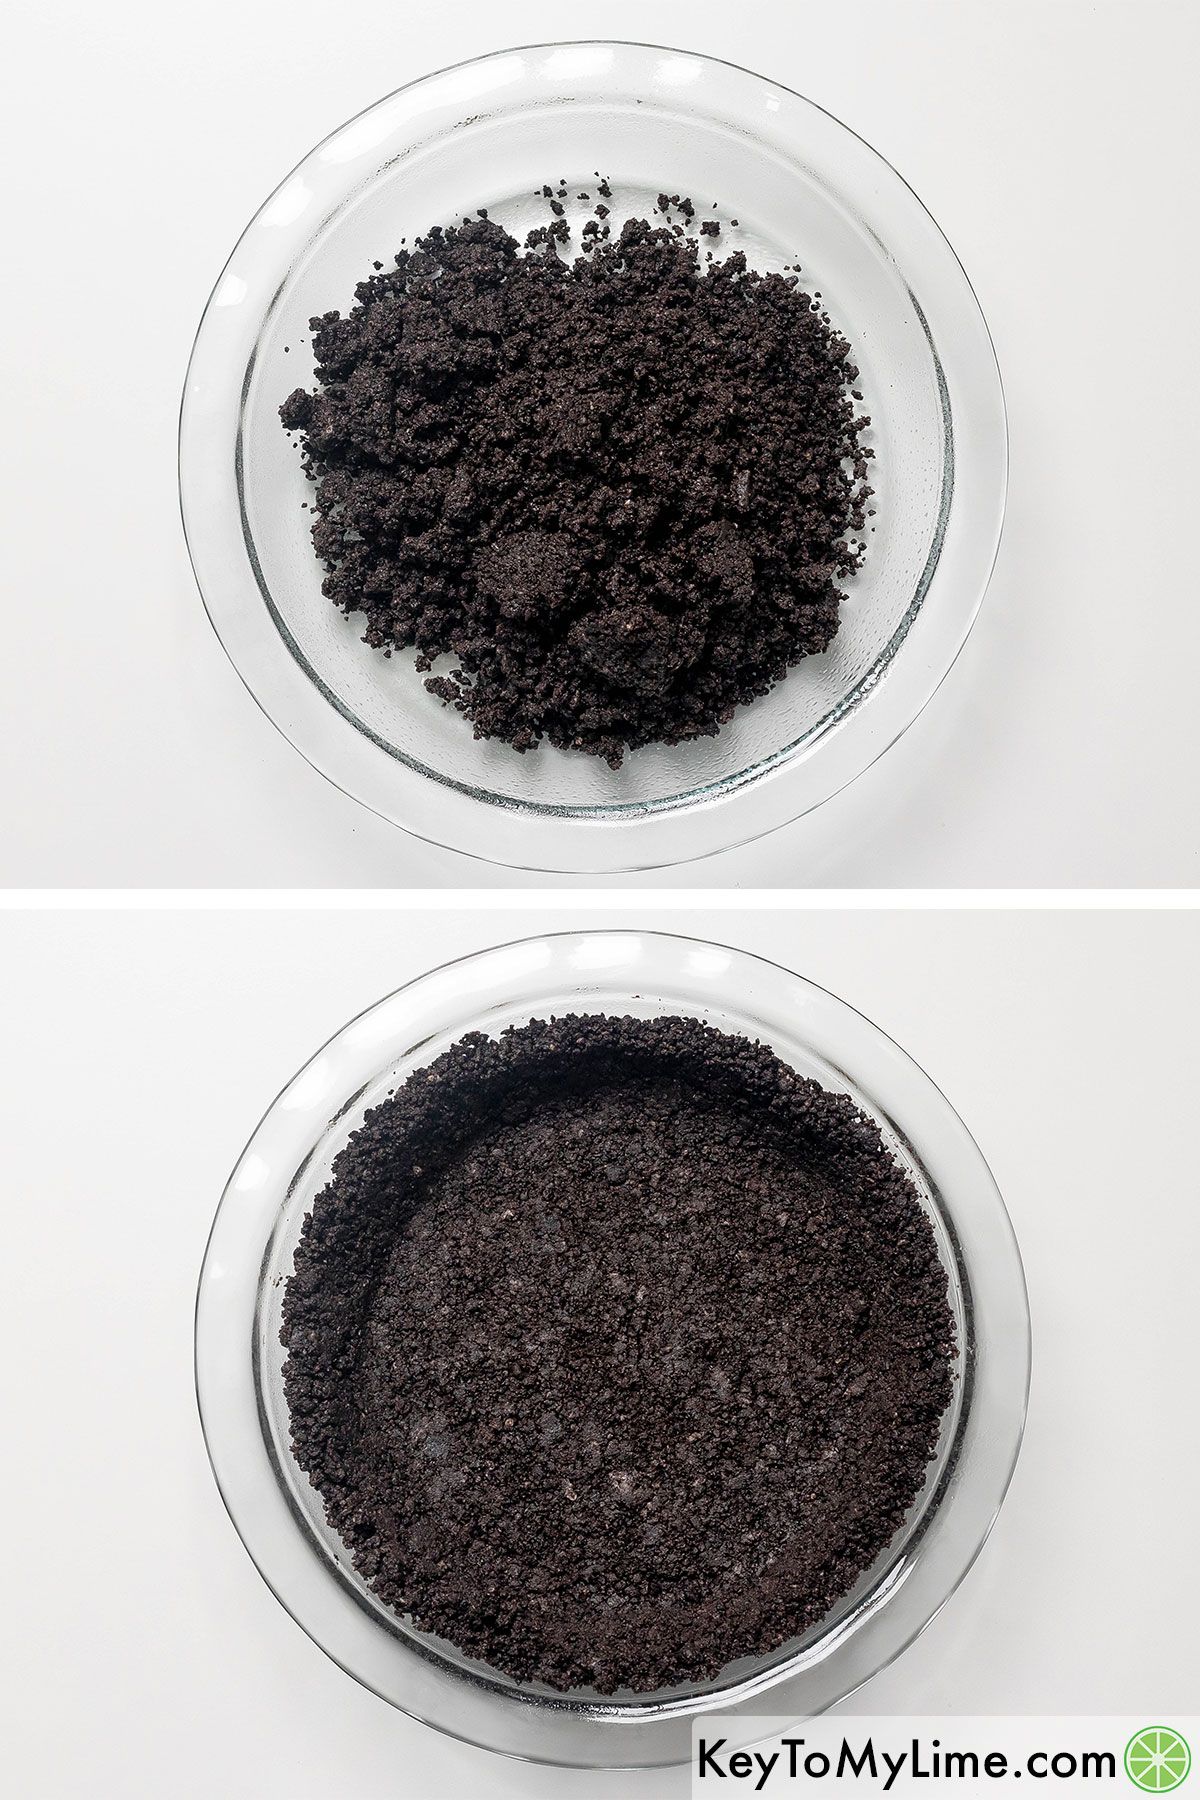 Place the crumbled Oreo mixture on a cake plate and spread it evenly.